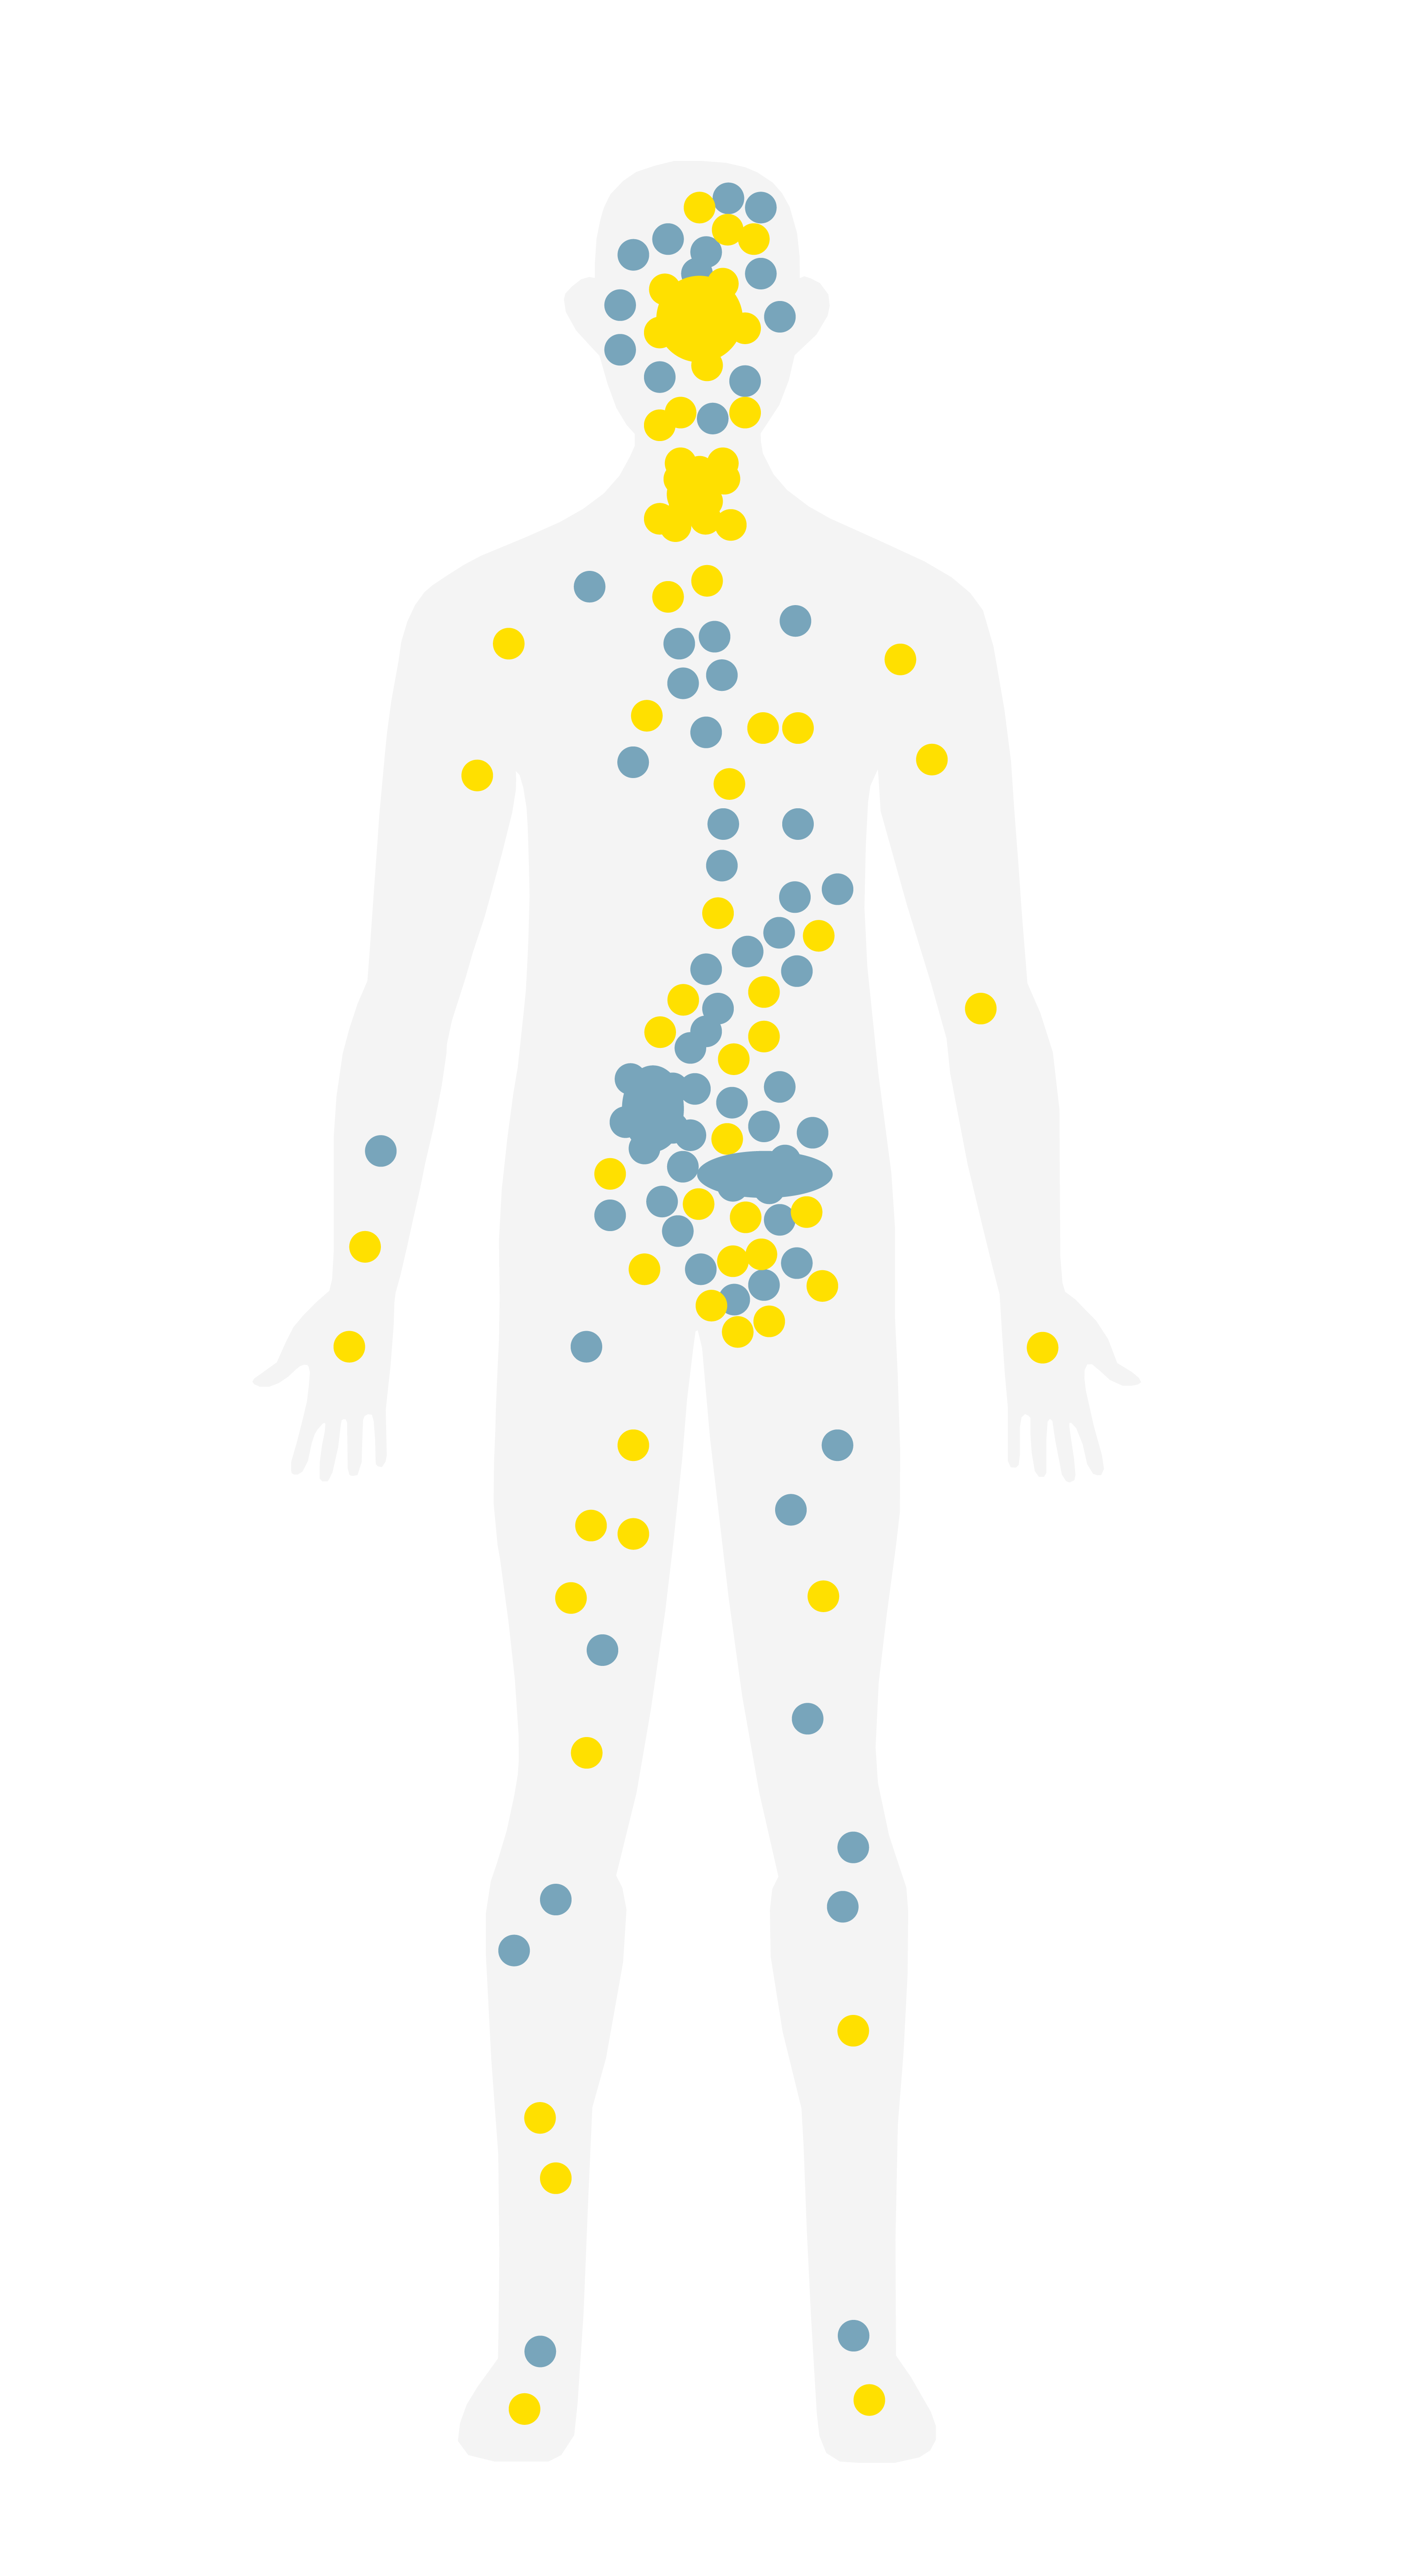 Graphic of the endocannabinoid system receptors in the human body